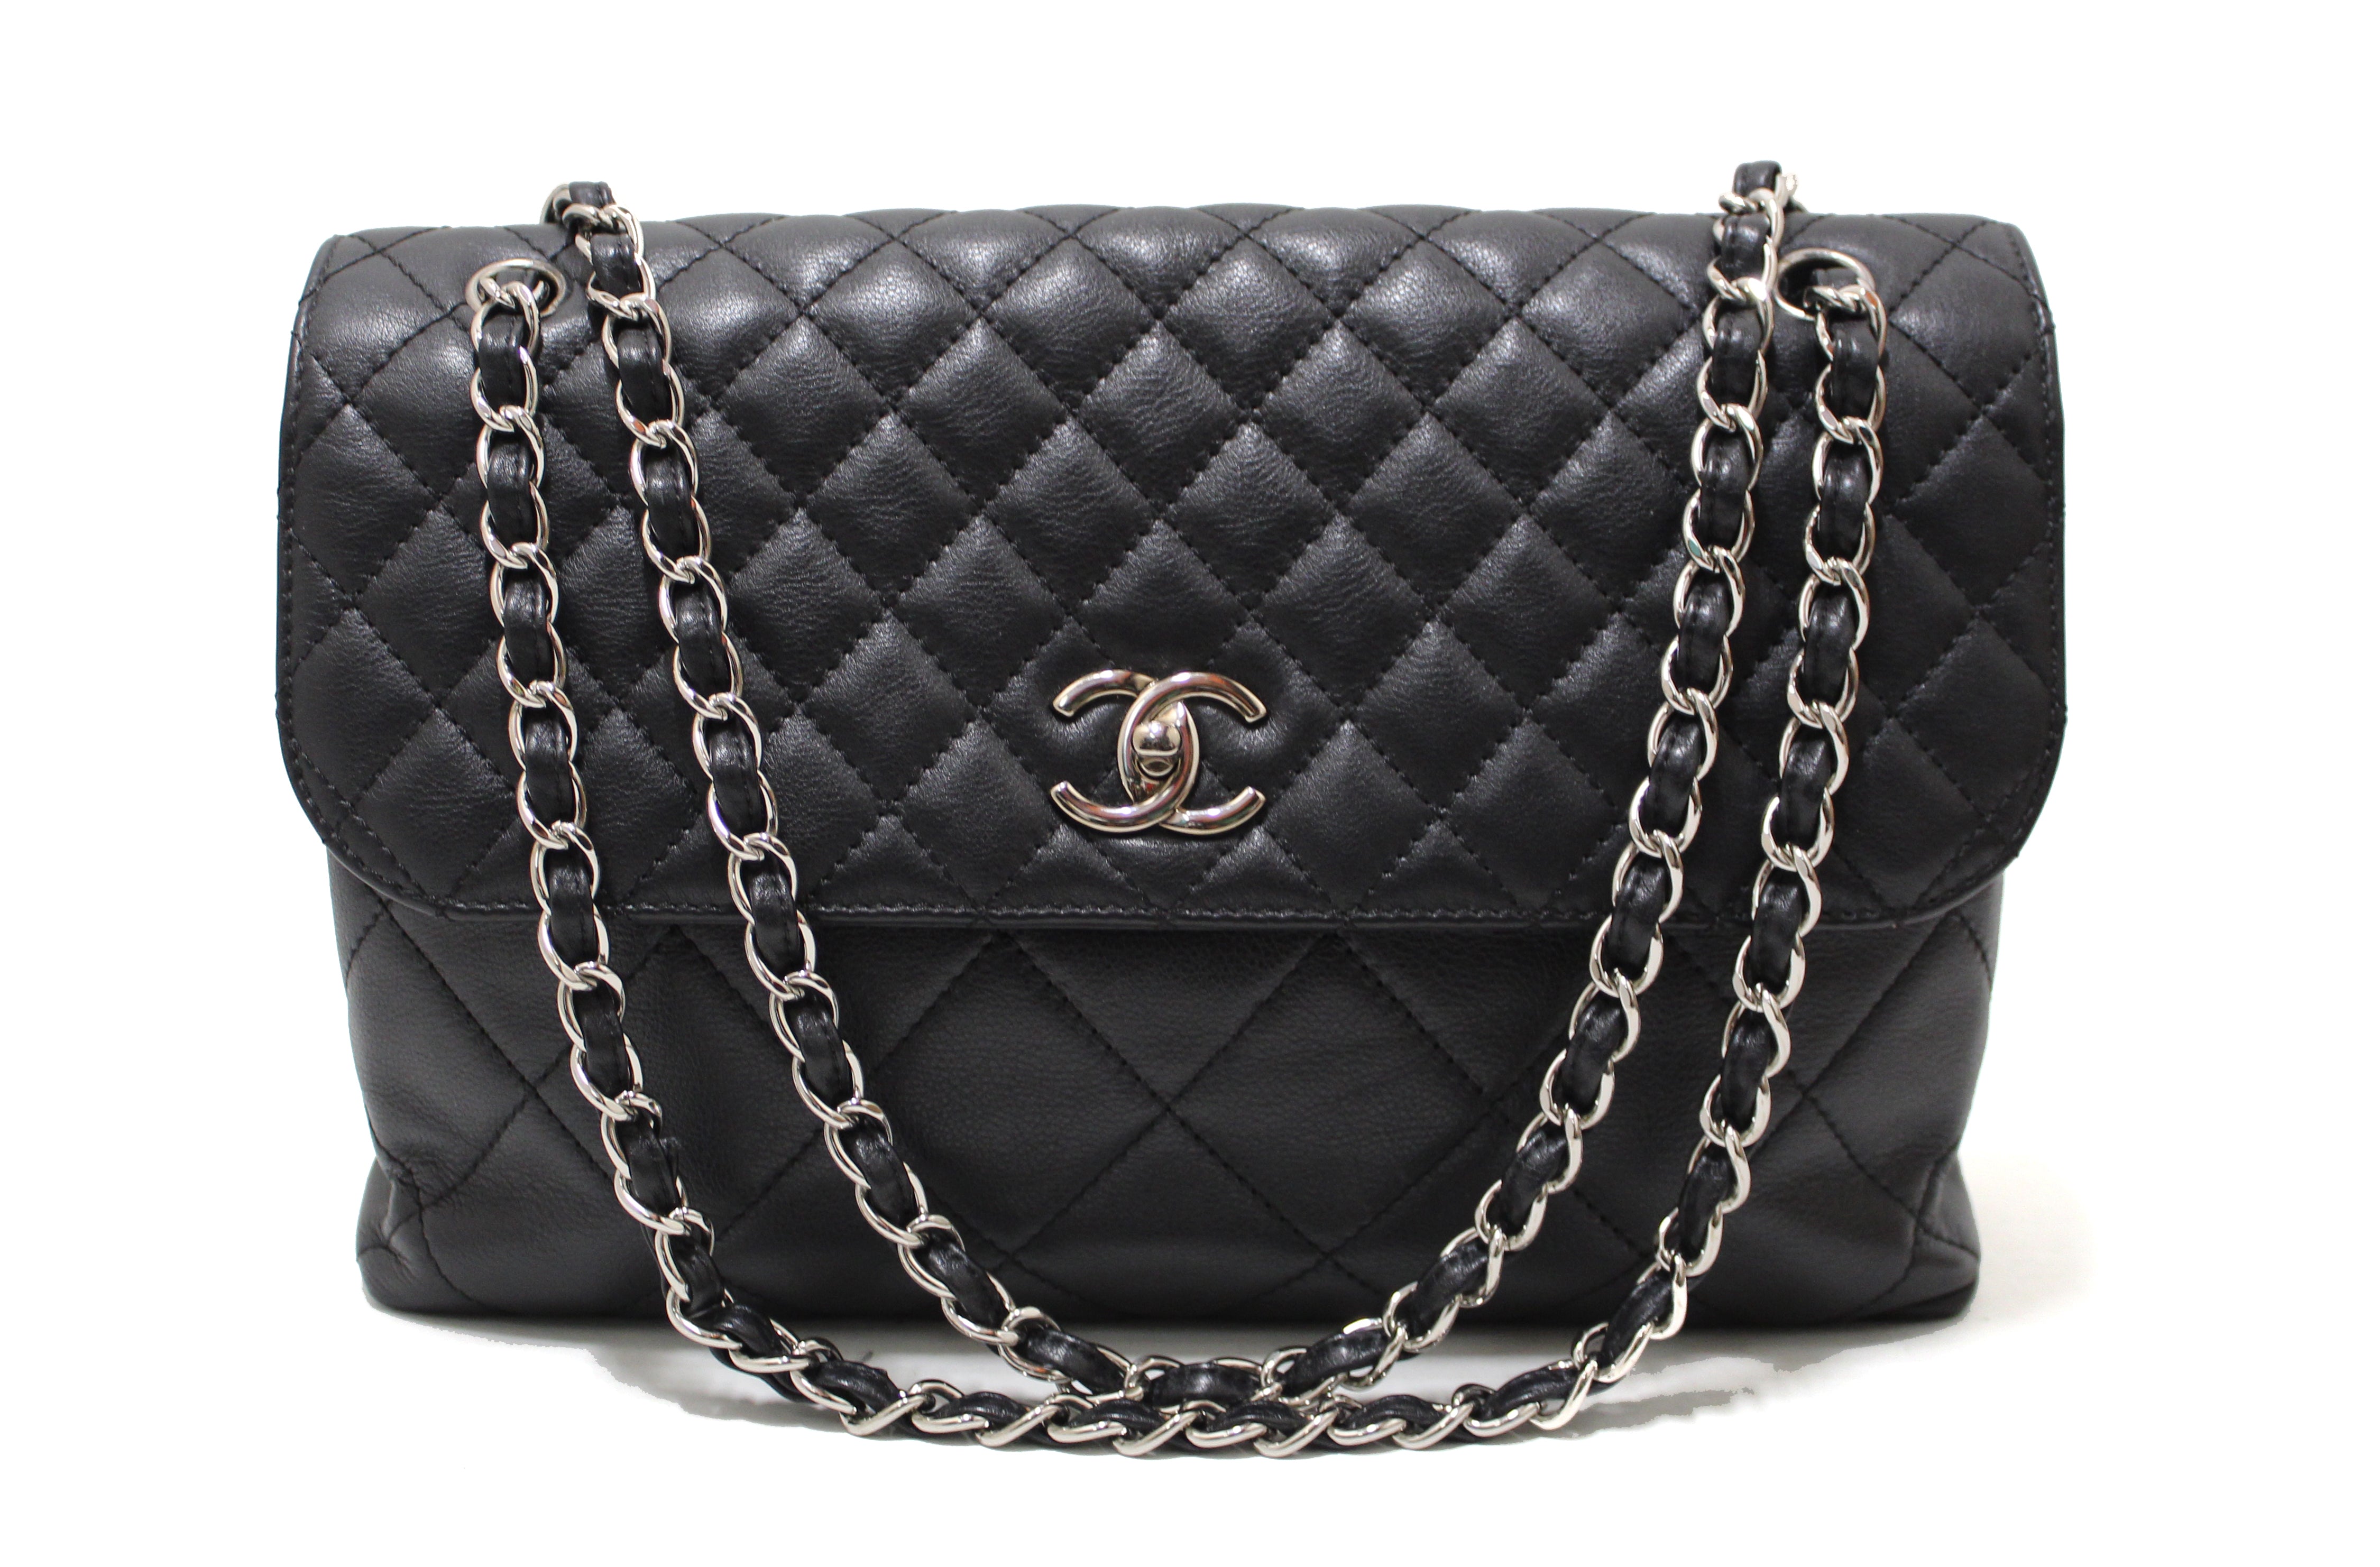 Authentic Chanel Classic Black Single Flap Calfskin leather "In the Business" Maxi Shoulder Chain Bag